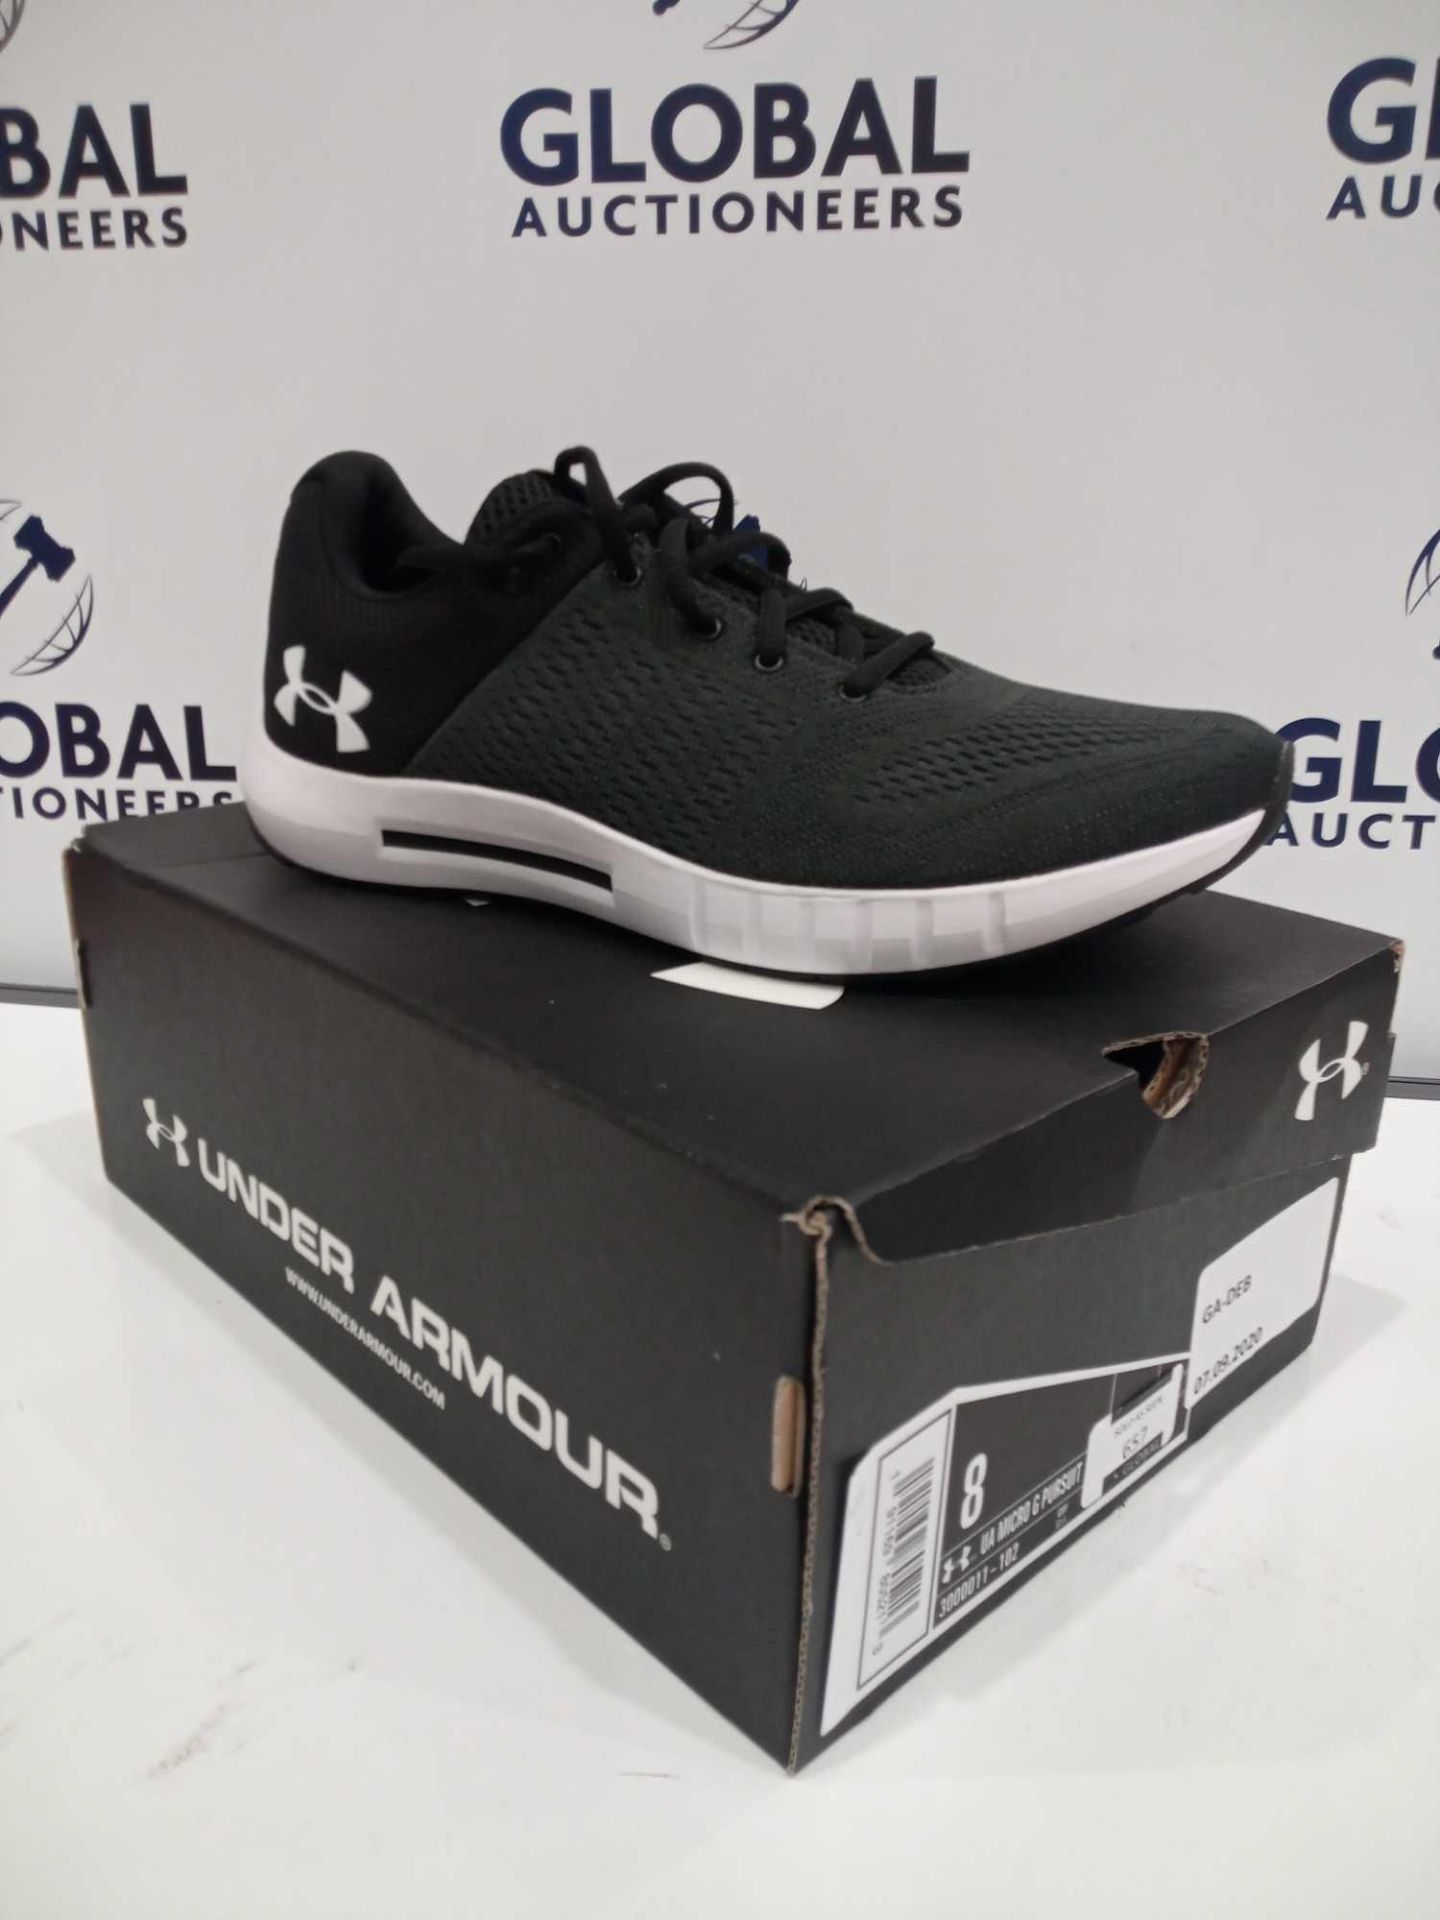 Rrp £35 Brand New Boxed Under Armour Men'S Uk Size 8 Micro G Pursuit Trainers - Image 2 of 2